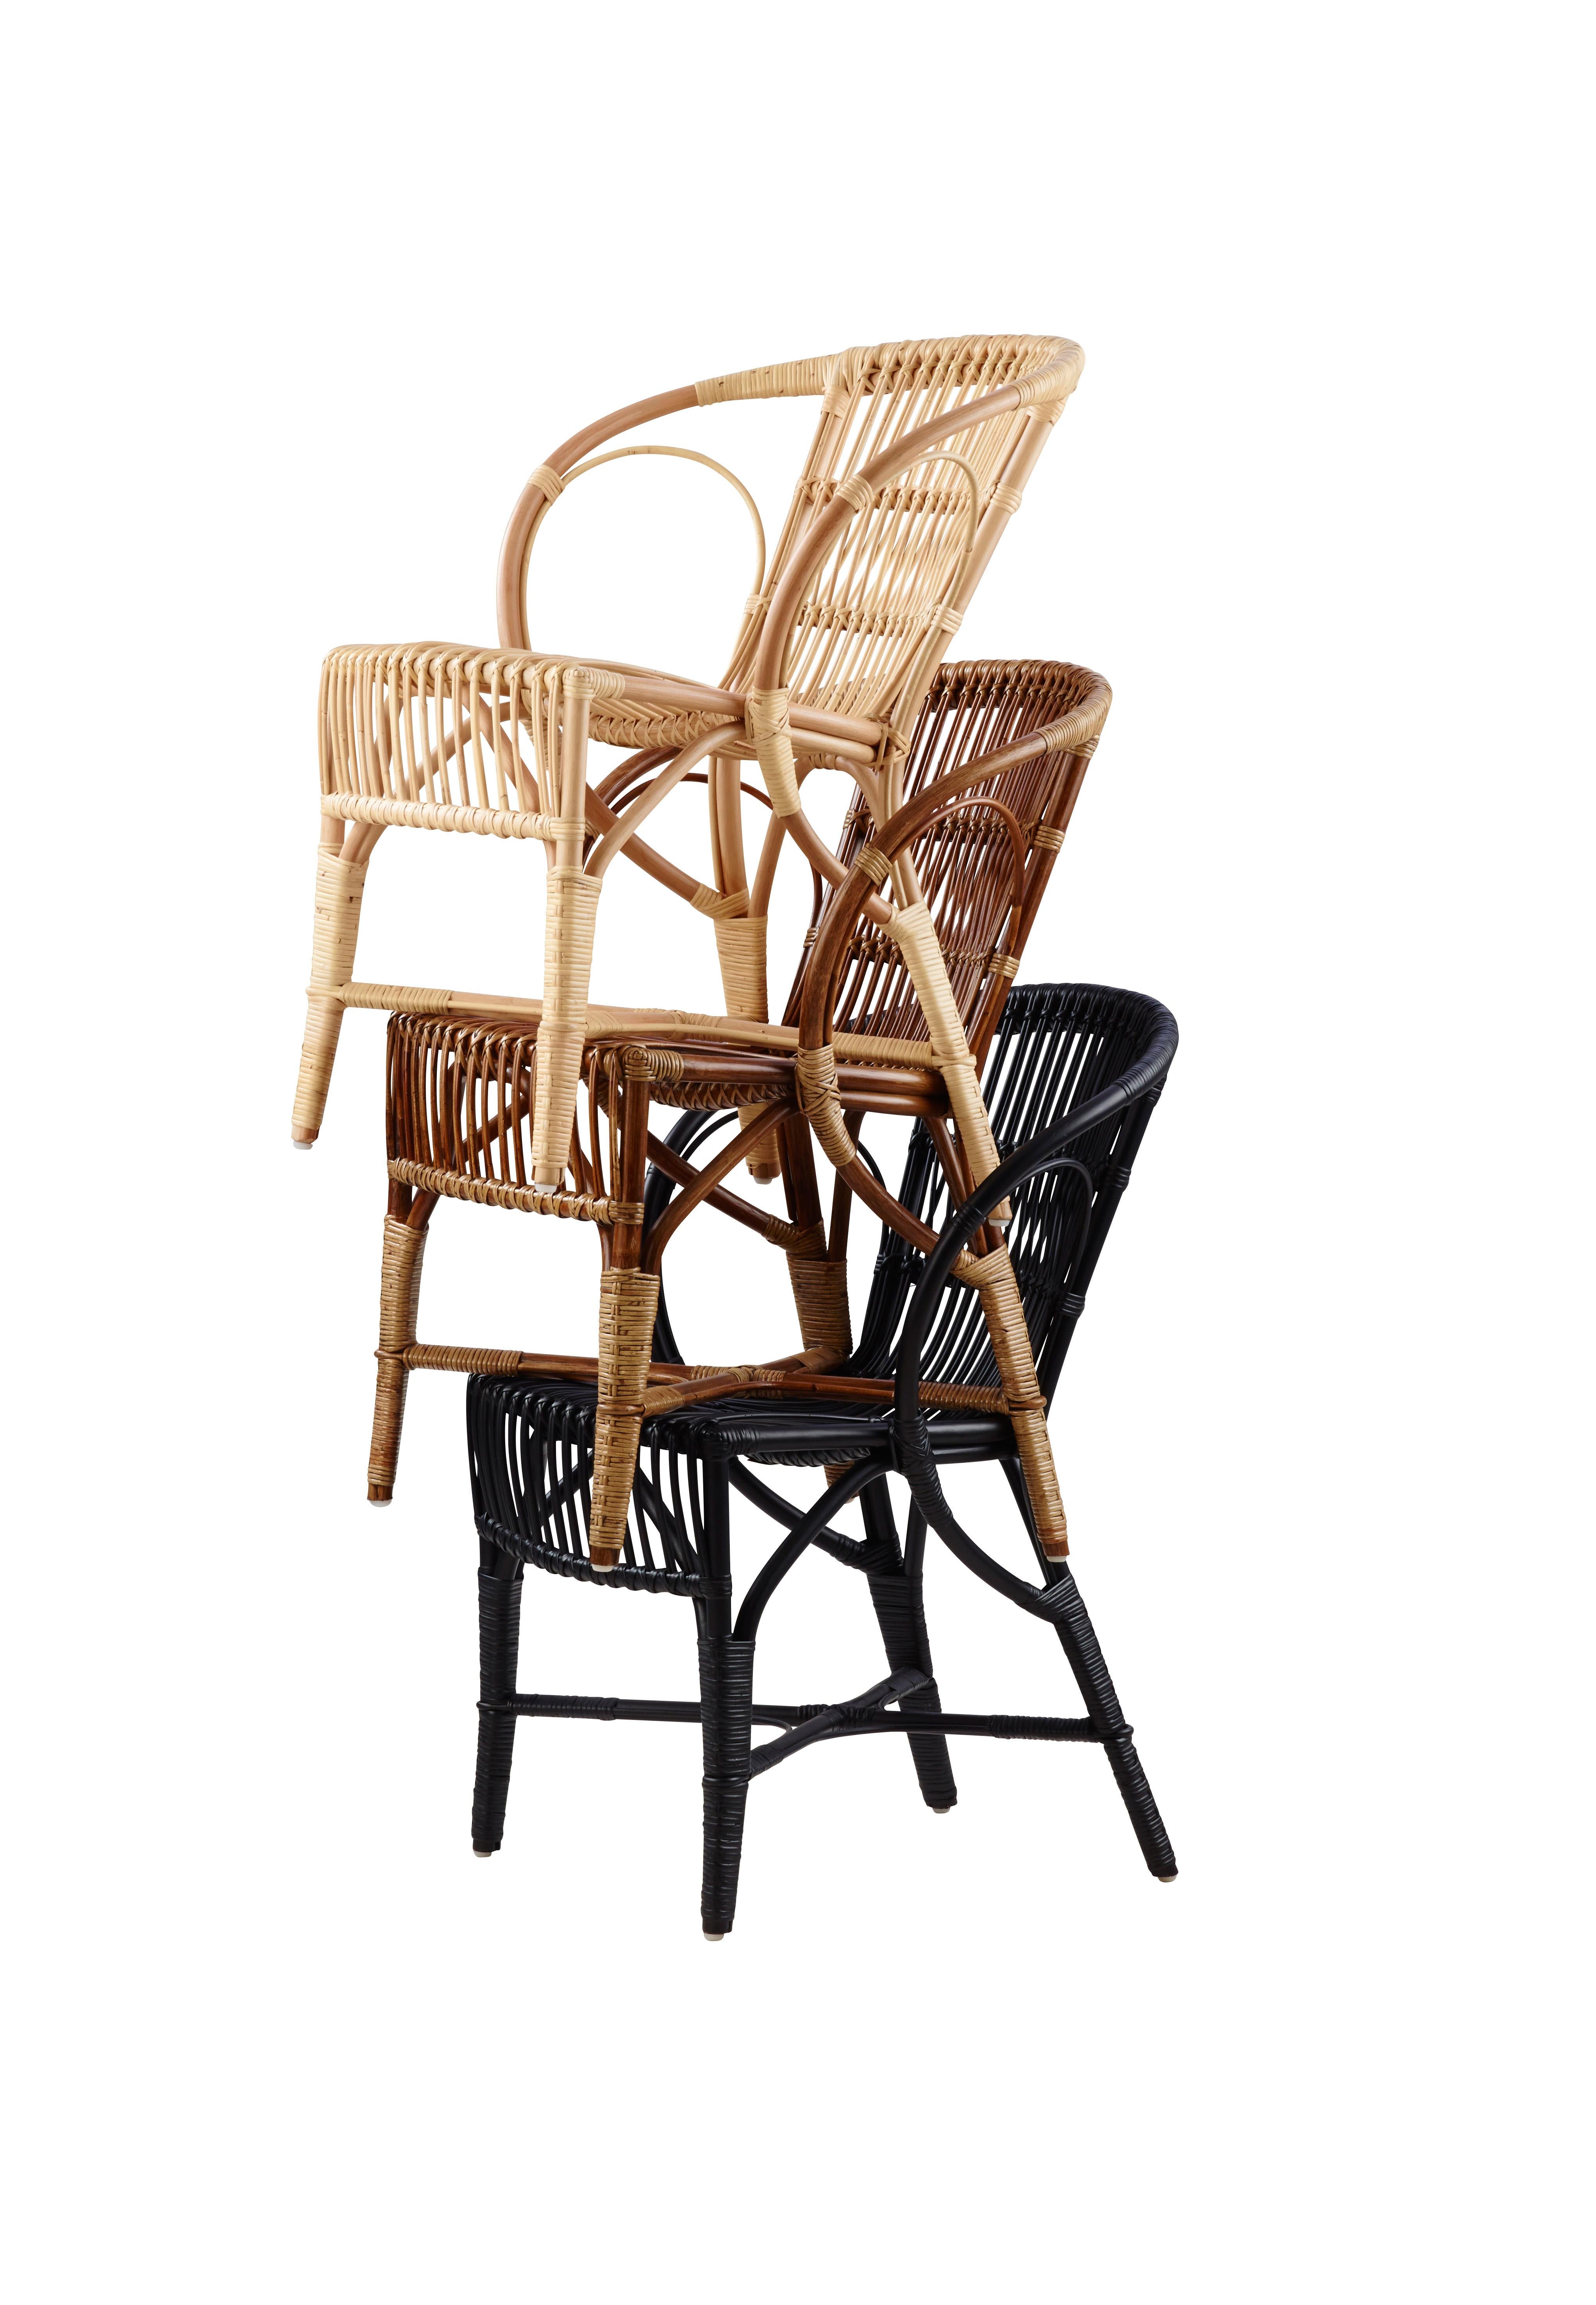 Robert Wengler perfected the fine craftsmanship of rattan furniture-making and was known for challenging his materials in new ways. With its unique pattern and signature curves, the eponymous Robert Wengler Chair is a testament both to Wengler's